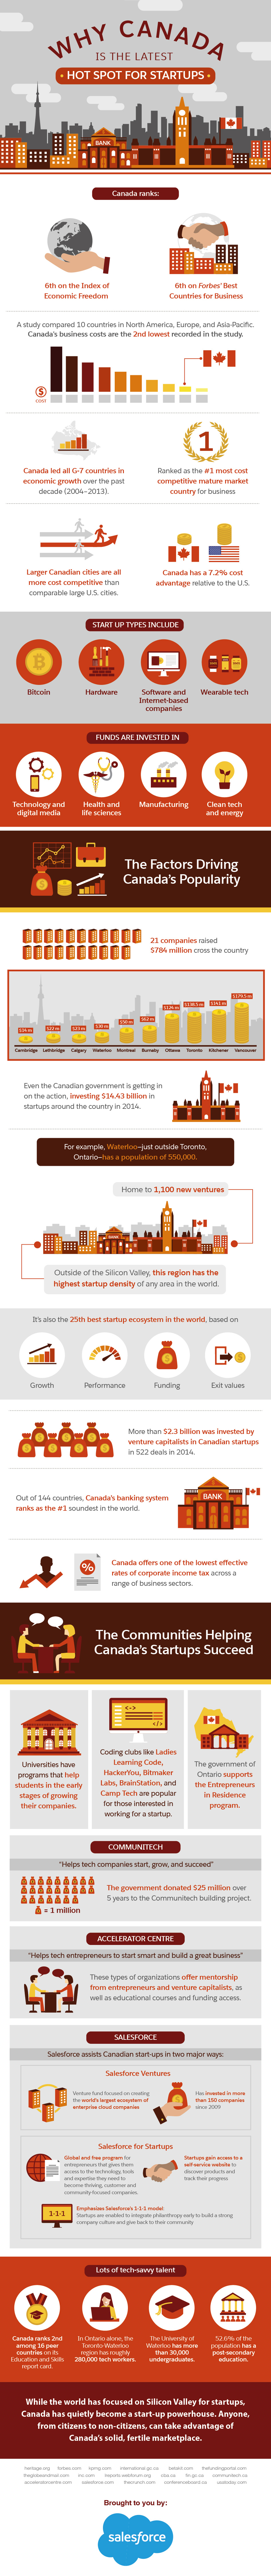 Why Canada is the Latest Hot Spot for Startups